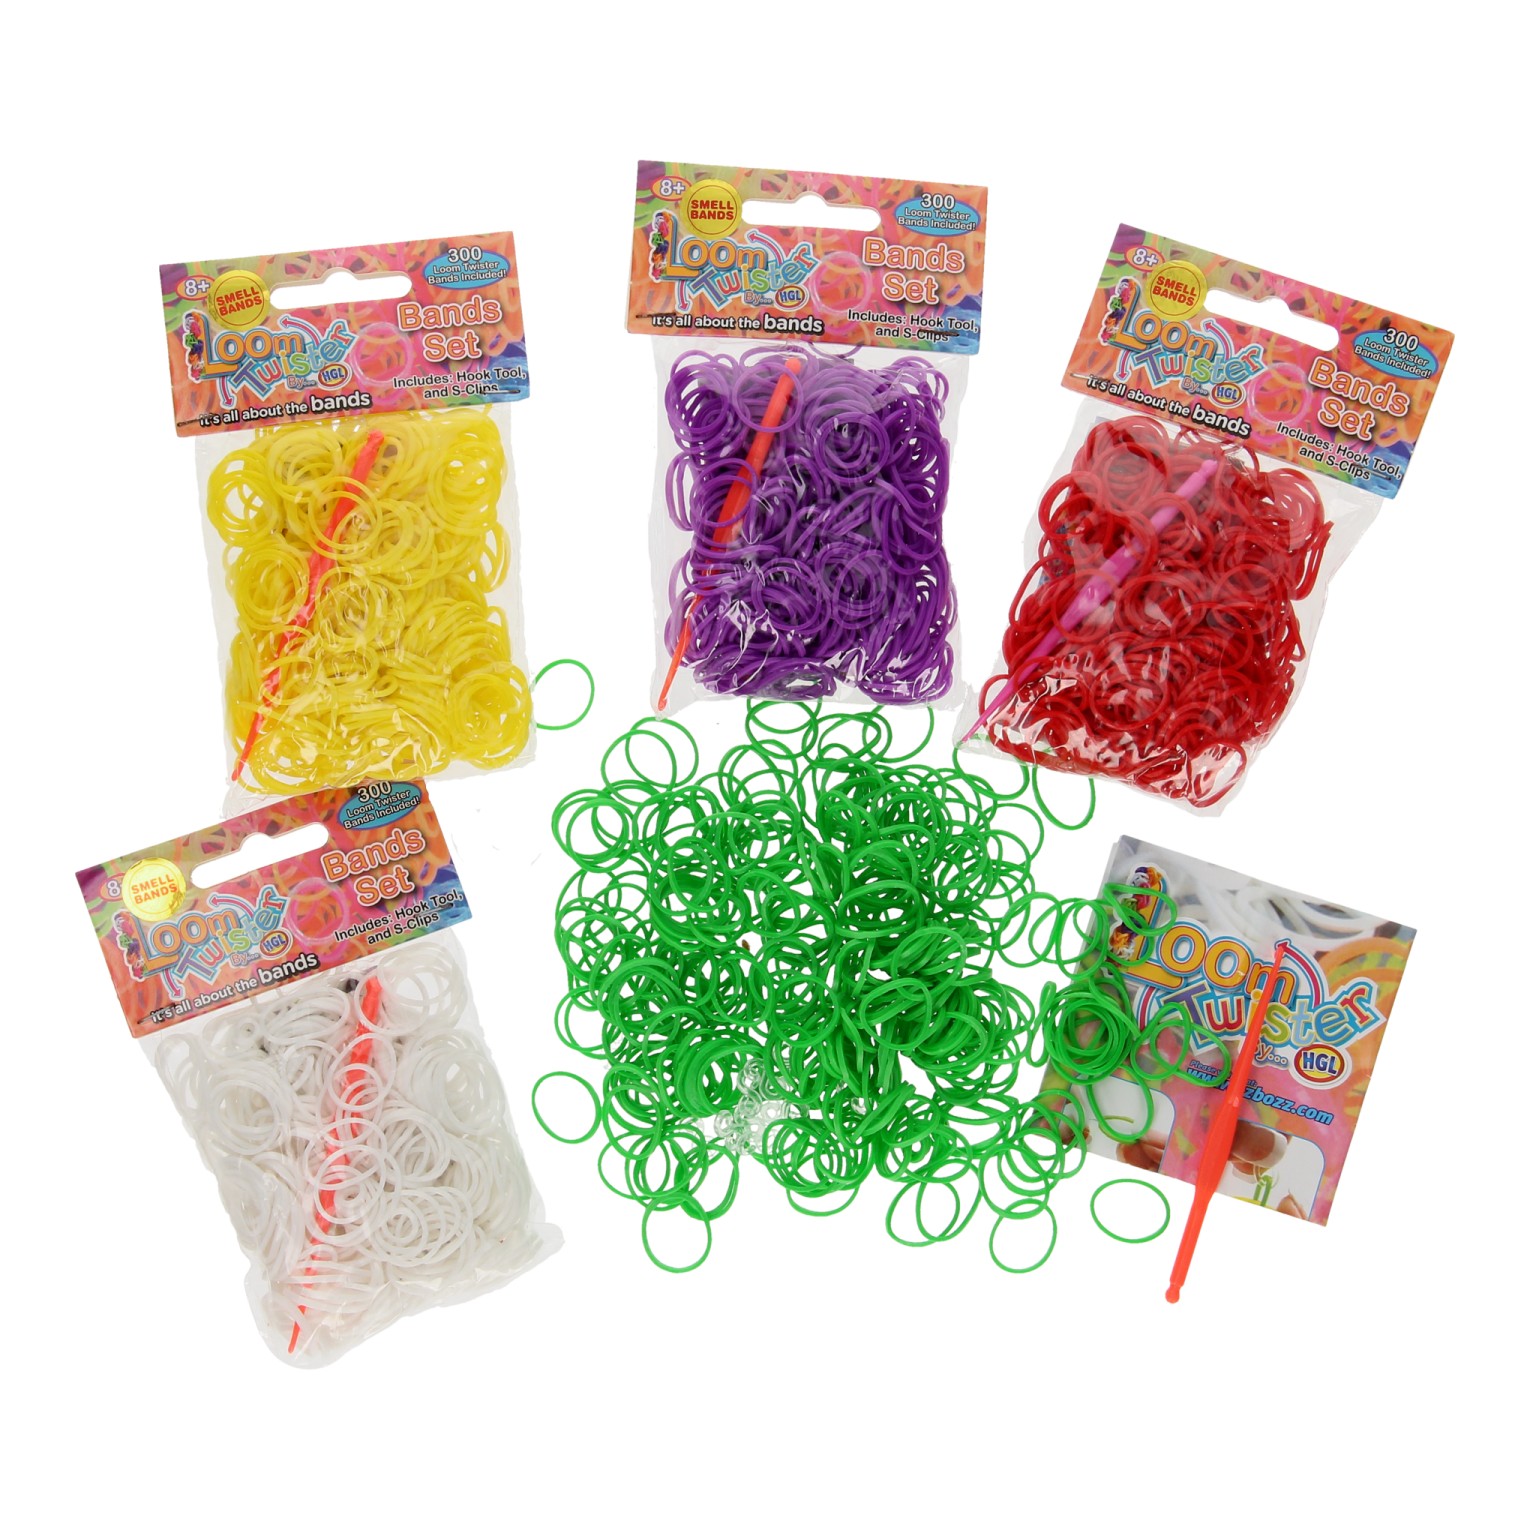 Geur Loombands